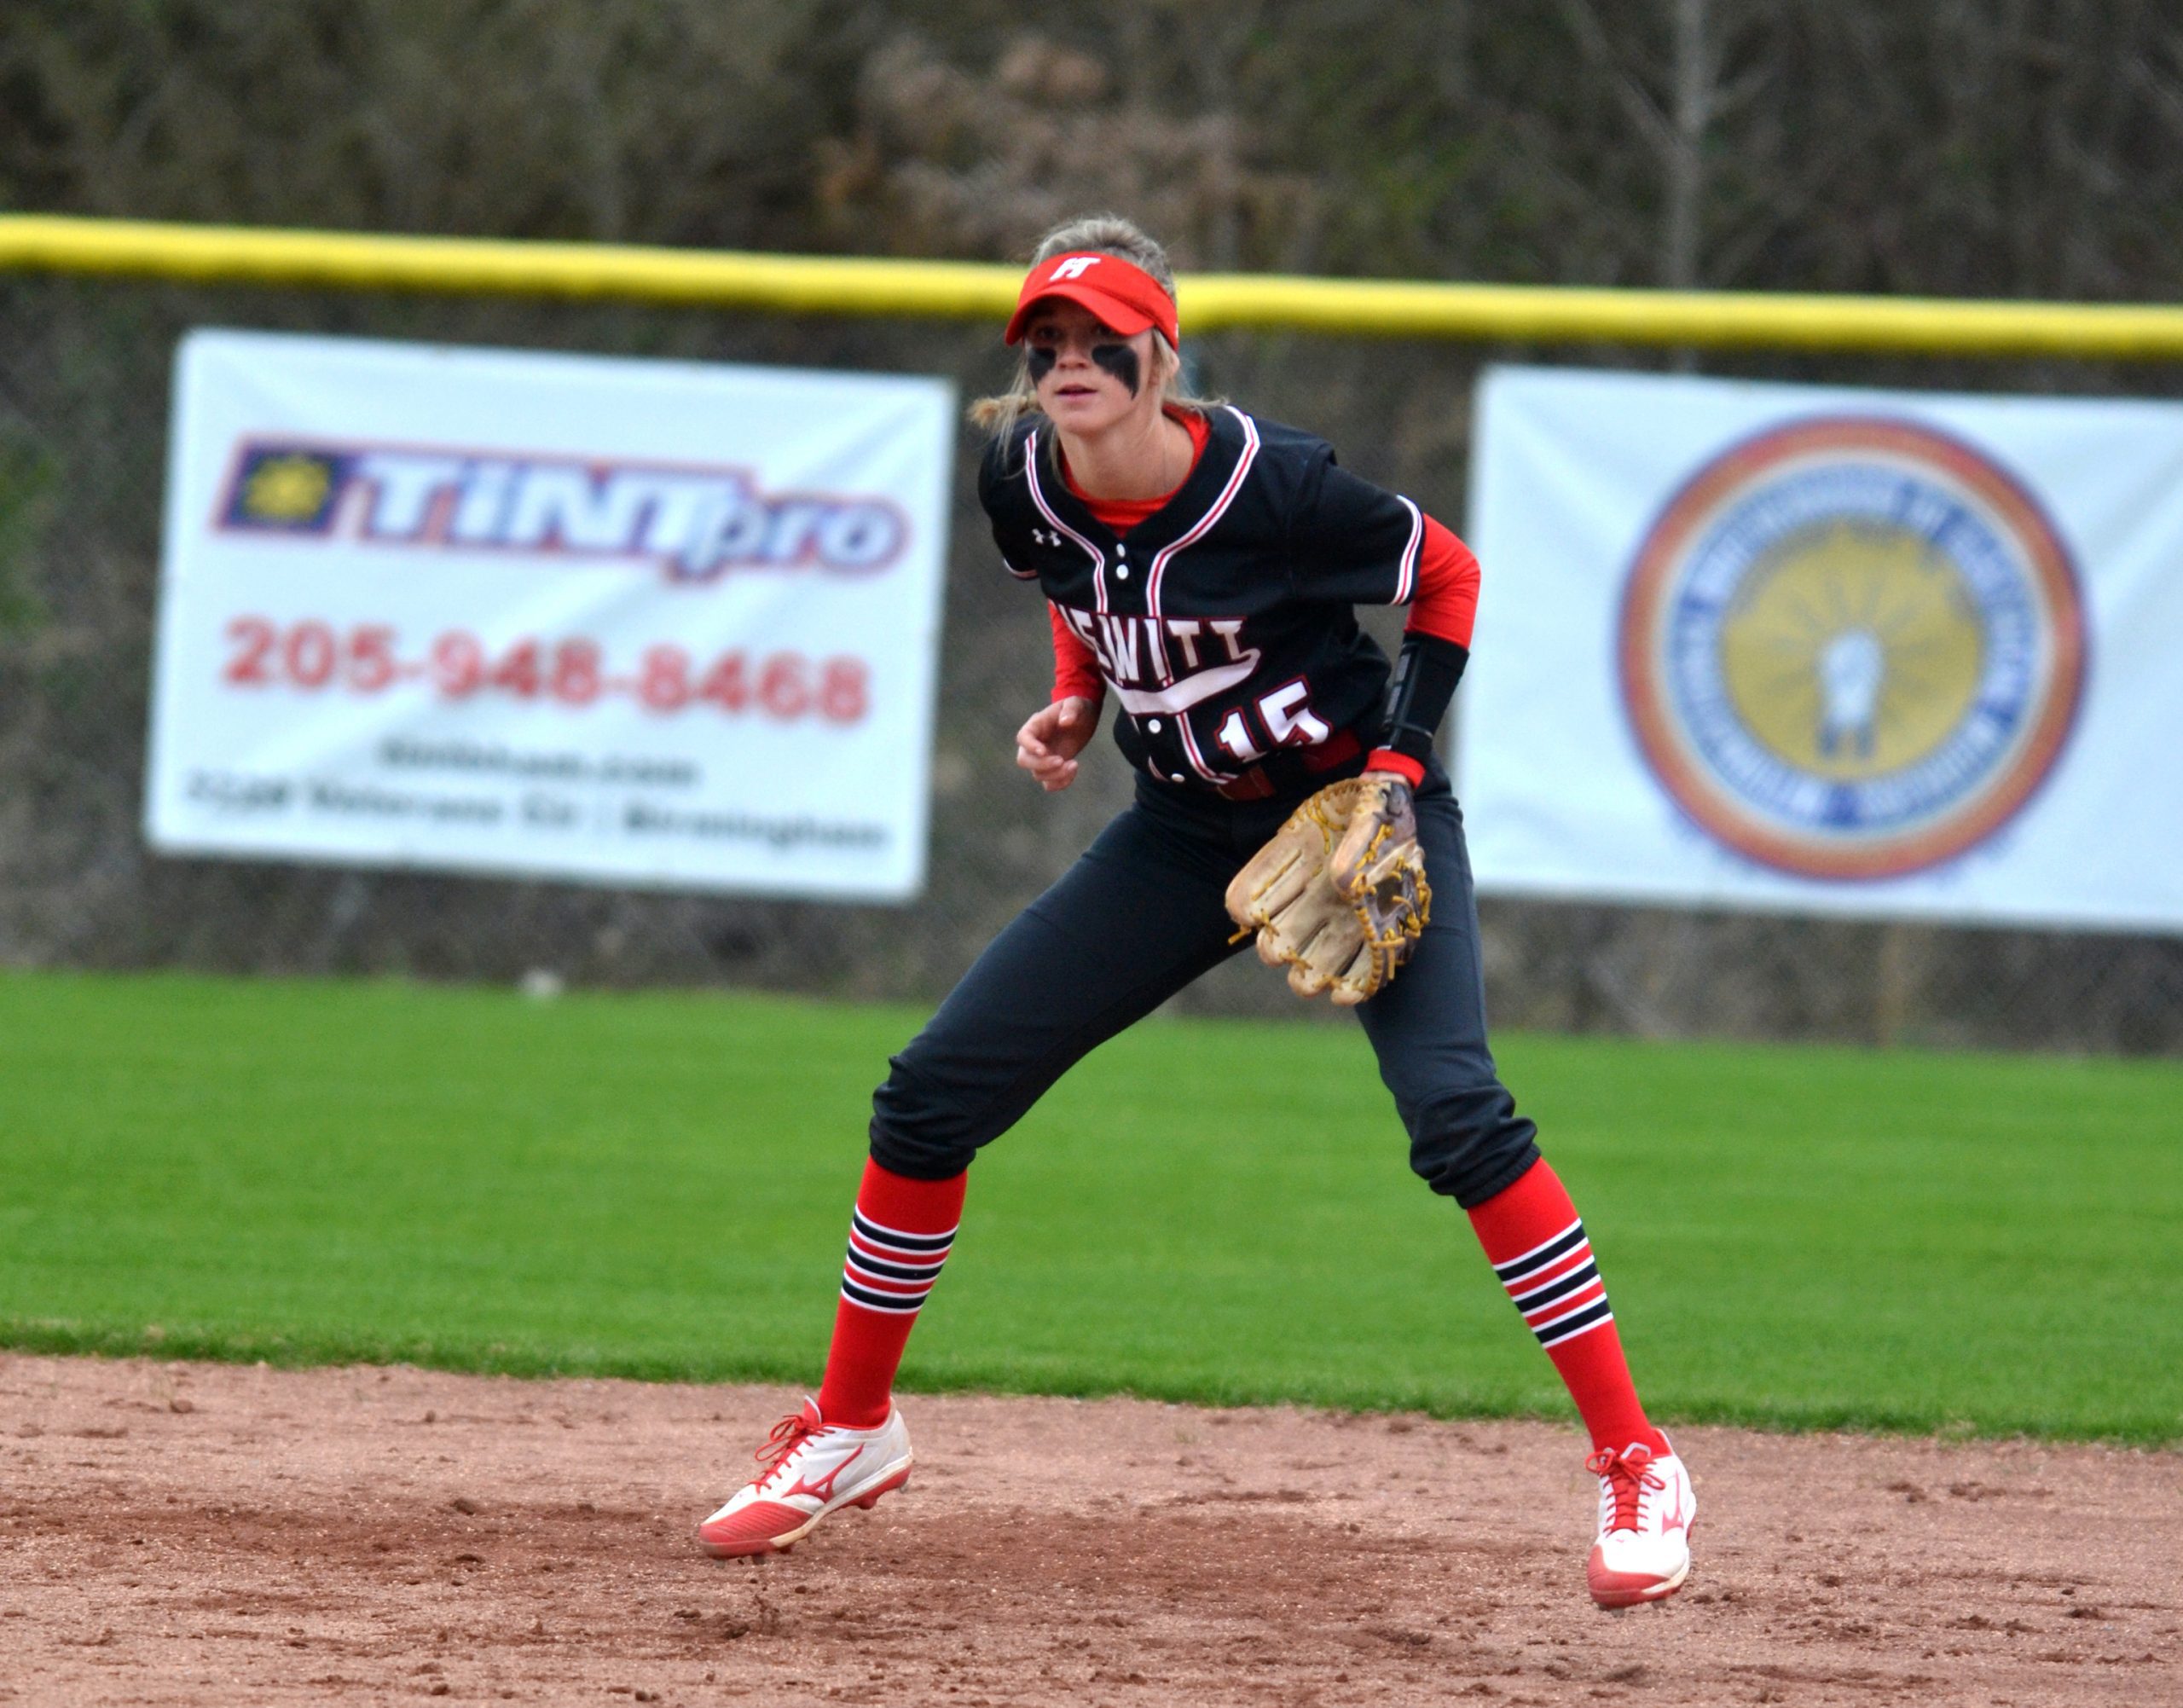 SOFTBALL ROUNDUP: Top-ranked Hewitt-Trussville goes 6-0 in Gulf Coast Classic